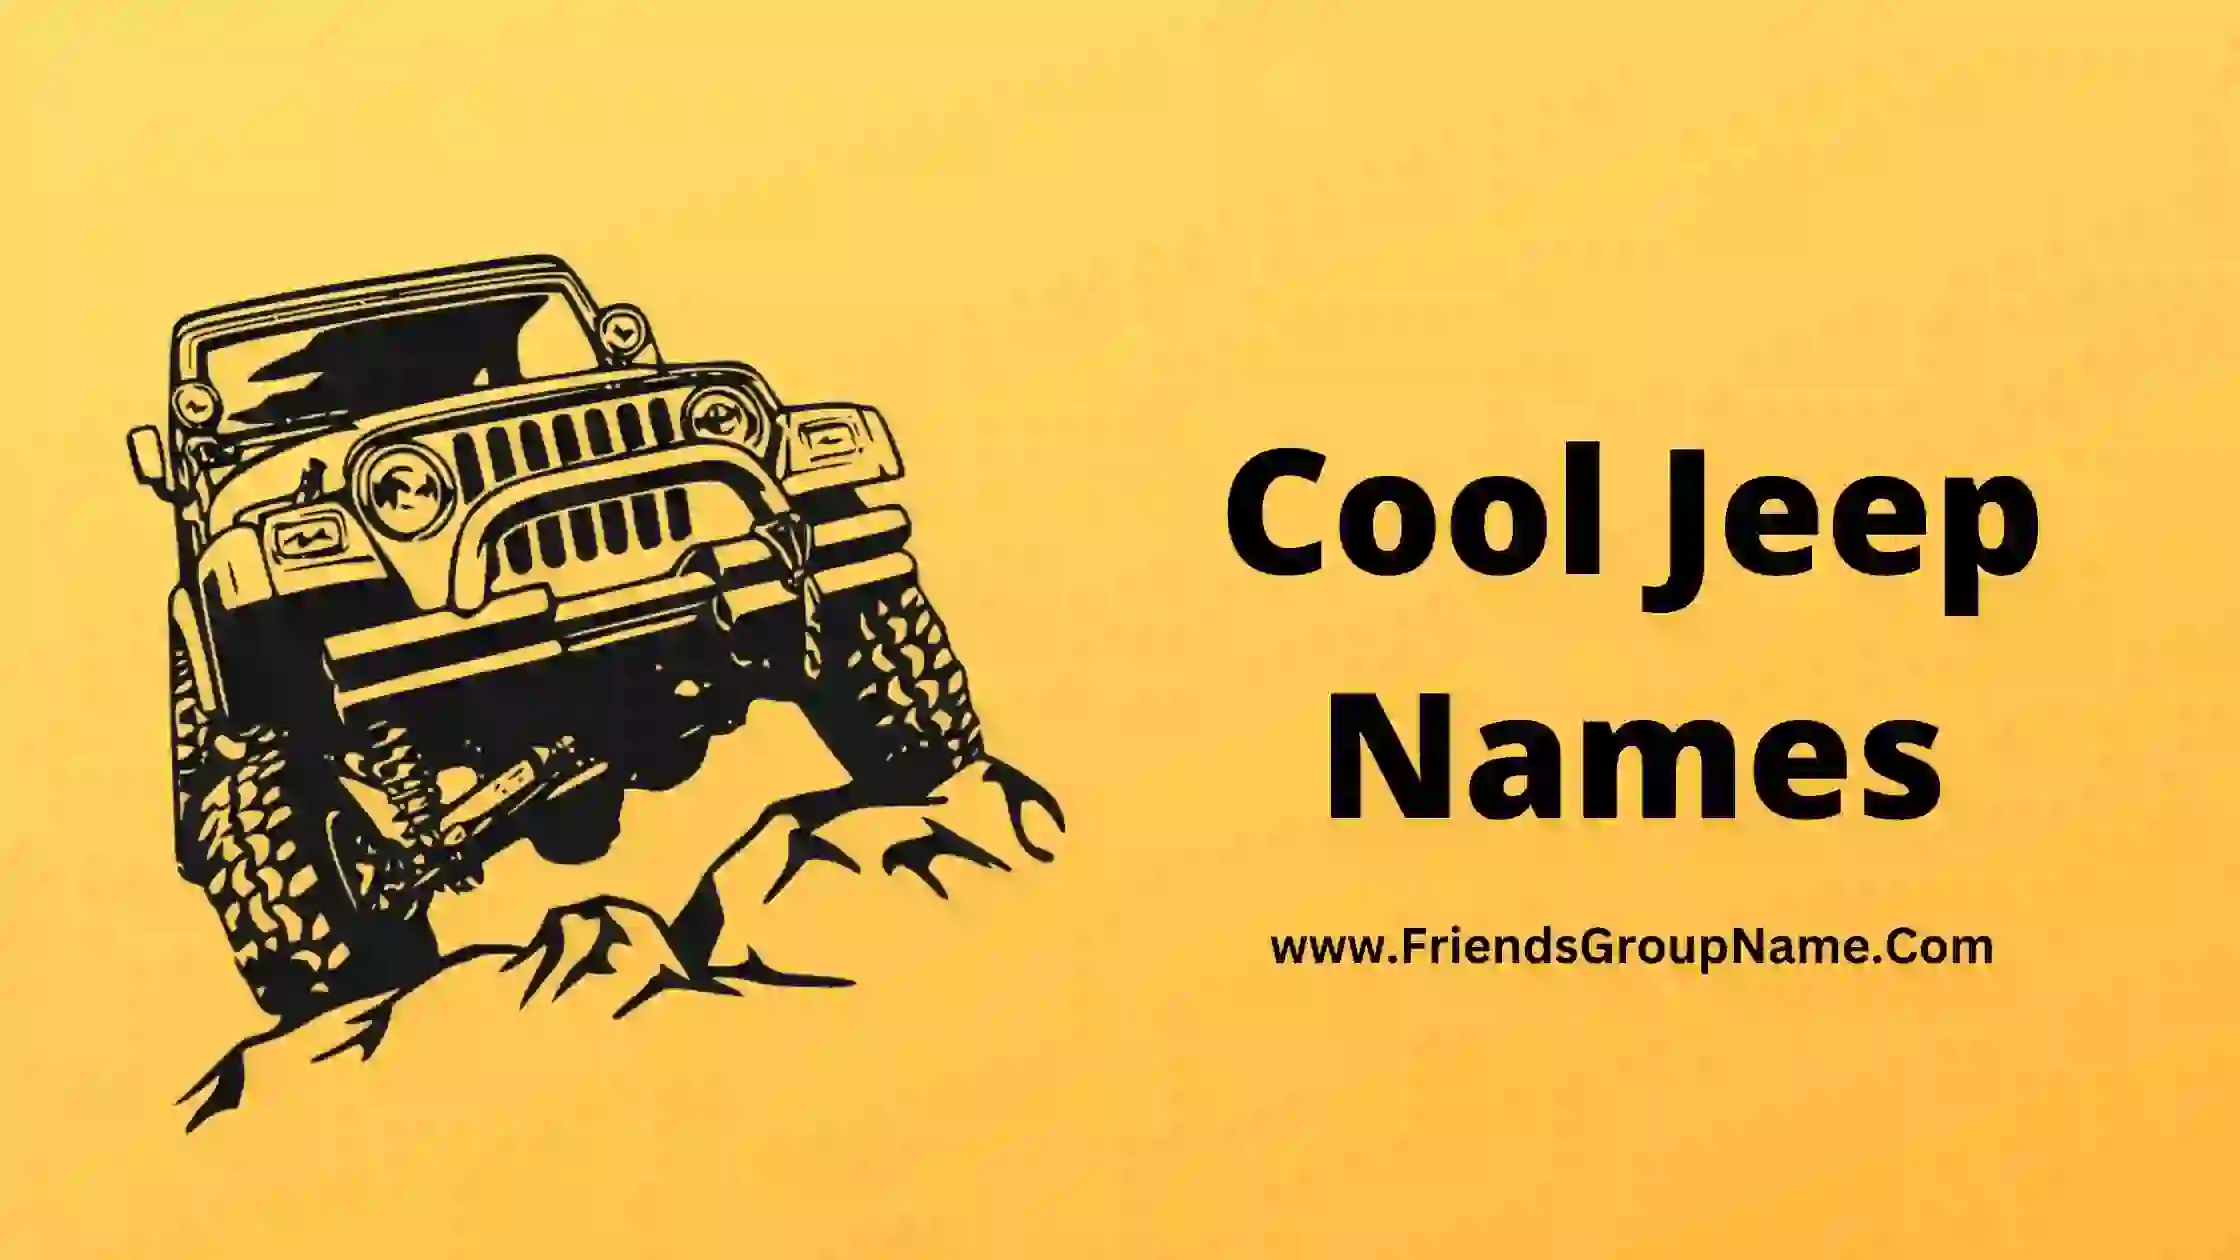 Cool Jeep Names